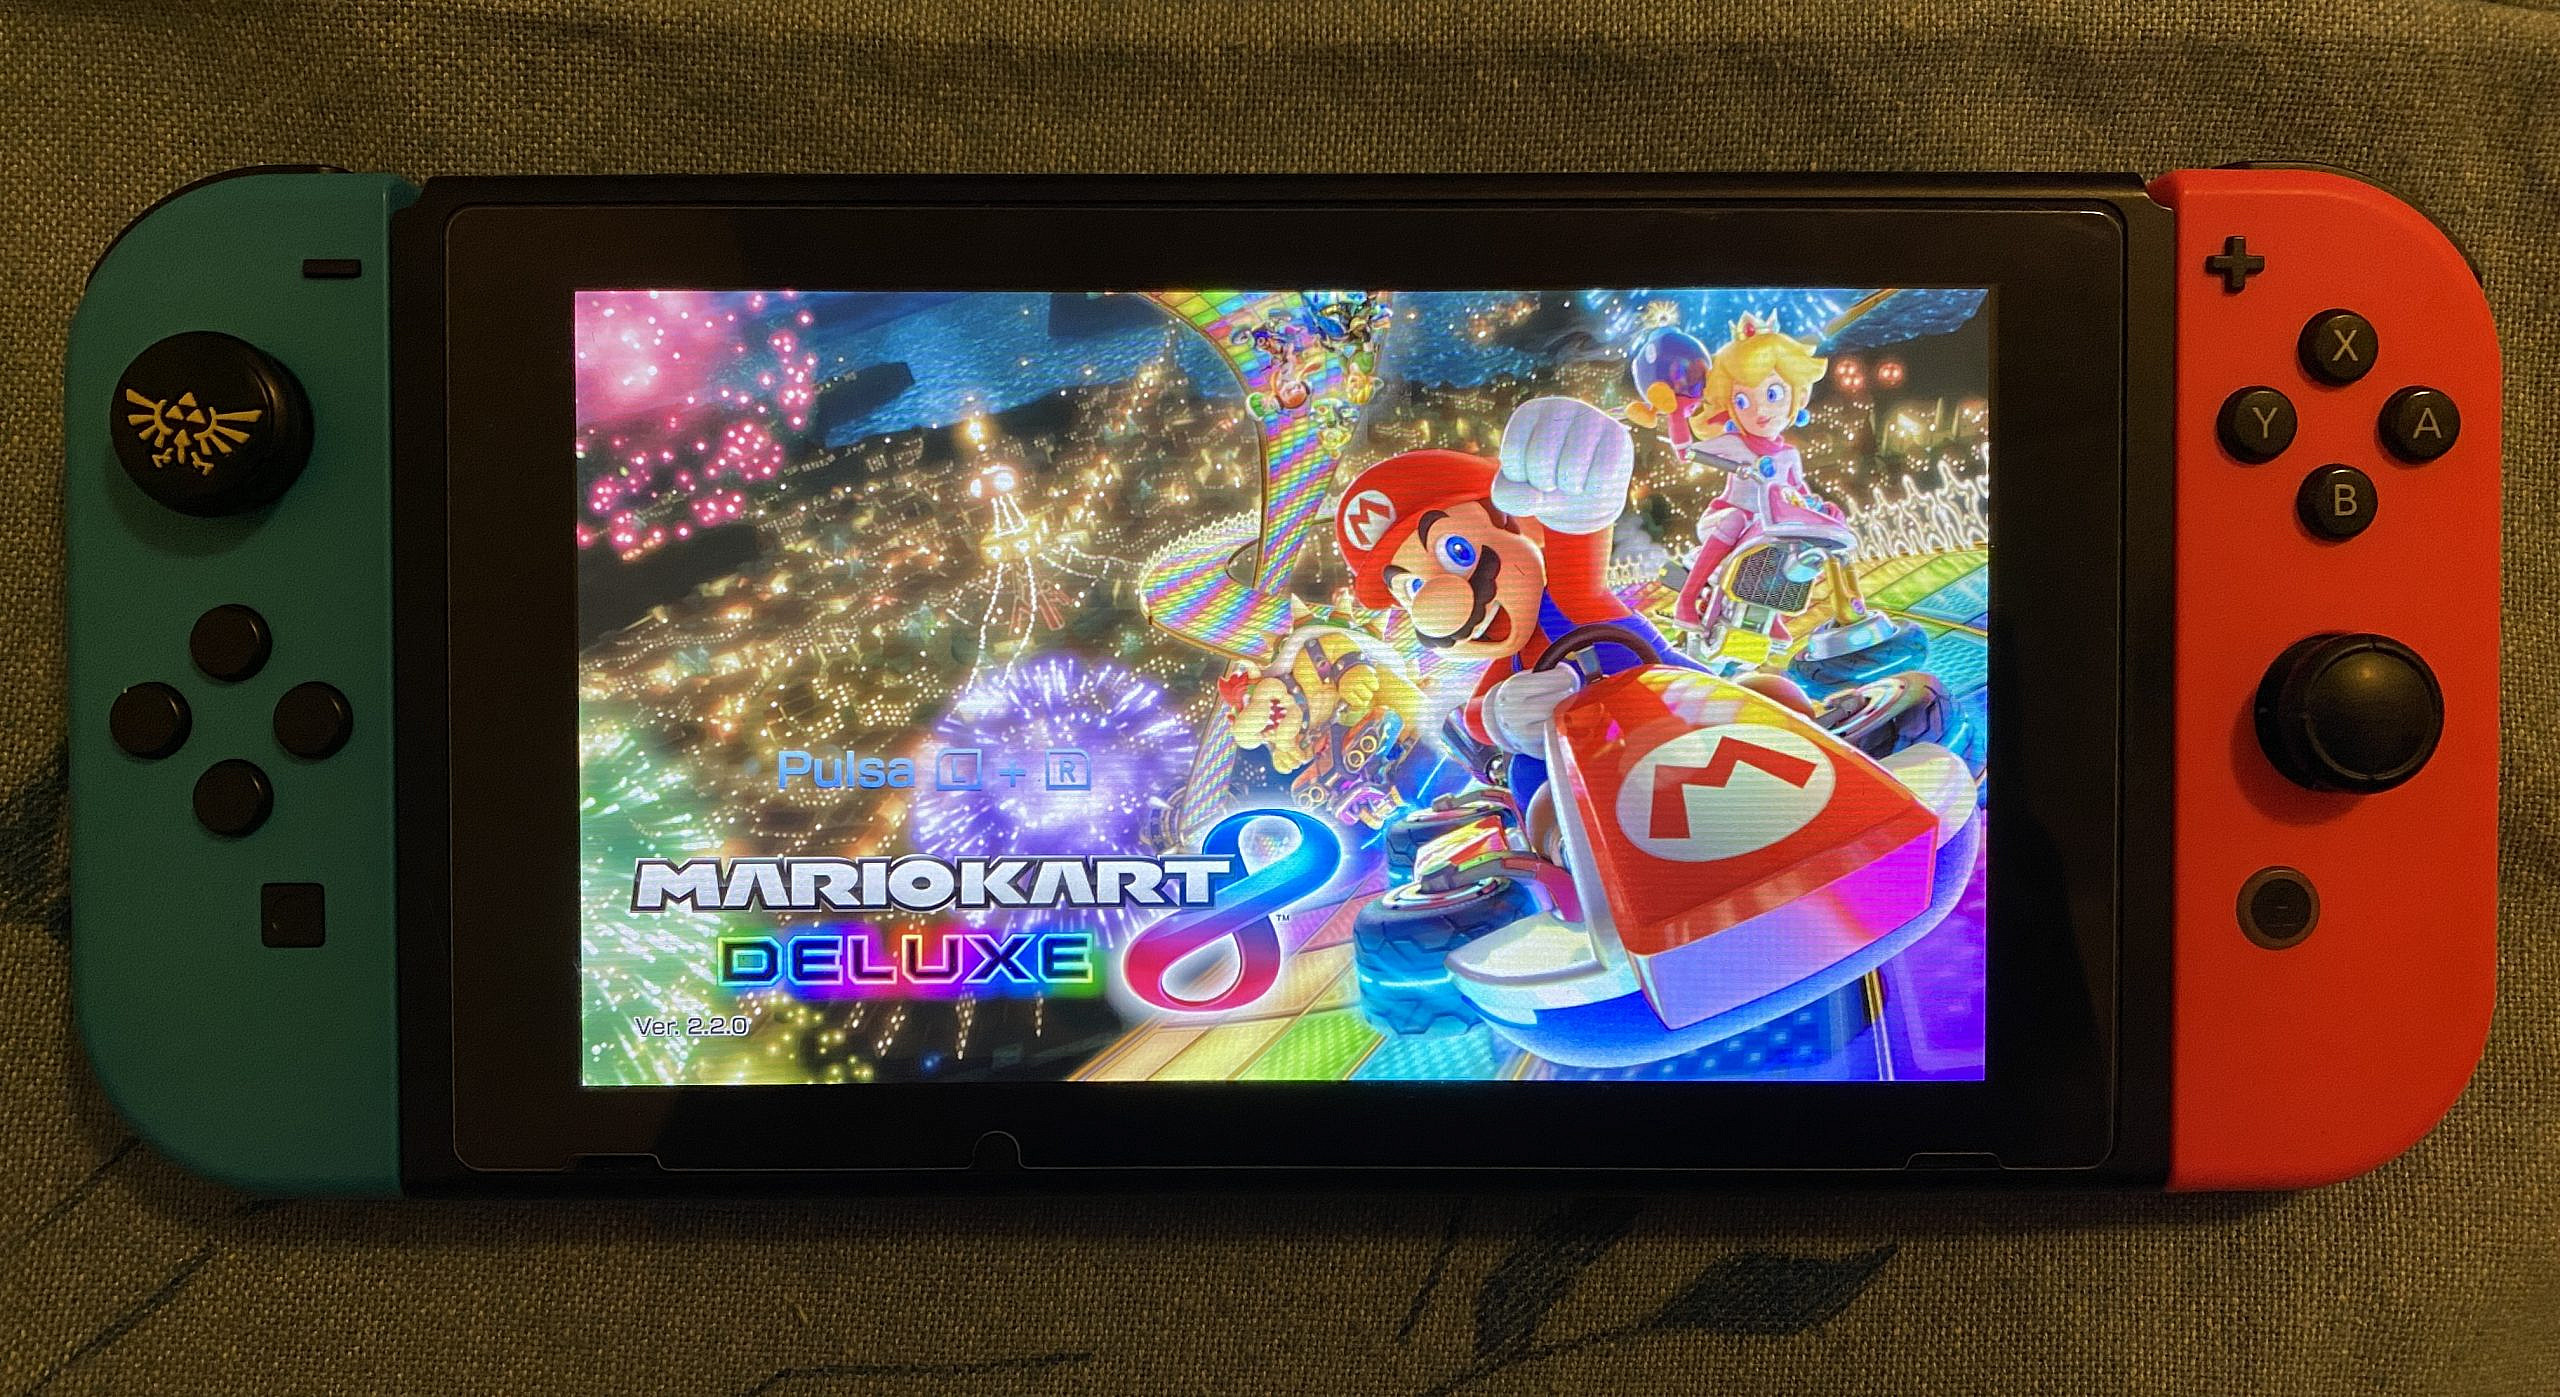 Why Mario Kart 8 Deluxe is the best videogame of this cars' saga? -  PlayLab! Magazine